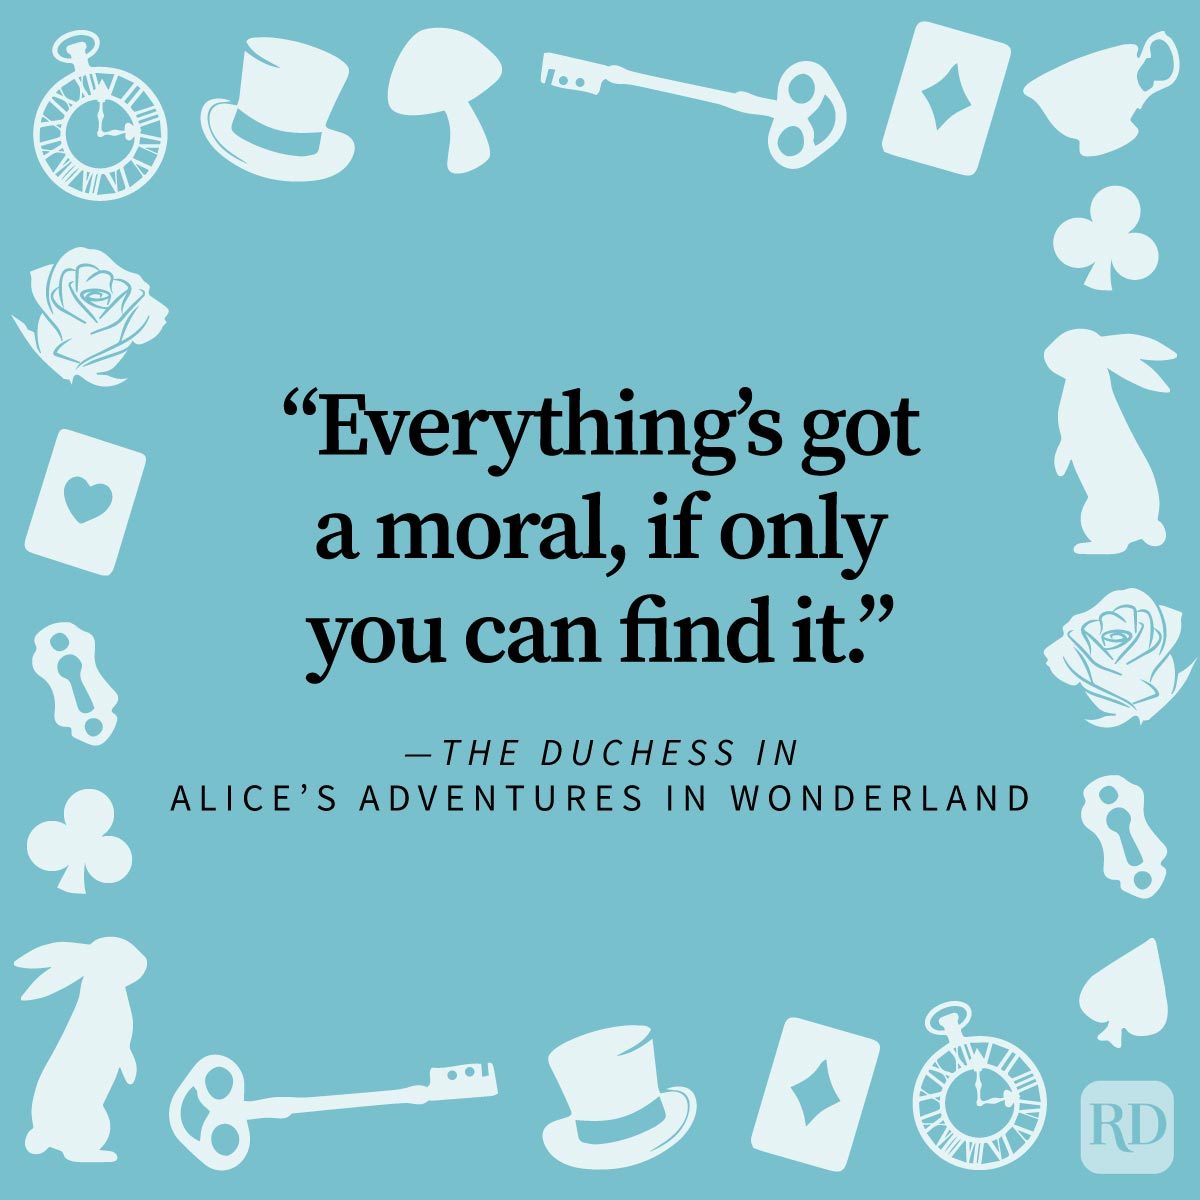 <p>31. "Everything's got a moral, if only you can find it." —<em>The Duchess in </em>Alice’s Adventures in Wonderland</p> <p>32. "But that's just the trouble with me. I give myself very good advice, but I very seldom follow it." —<em>Alice in Disney's</em> Alice’s in Wonderland</p> <p>33. "'I can't explain <em>myself</em>, I'm afraid, sir,' said Alice, 'because I'm not myself, you see.'" —<em>Alice in</em> Alice’s Adventures in Wonderland</p> <p>34. "How puzzling all these changes are! I'm never sure what I'm going to be, from one minute to another." —<em>Alice in</em> Alice’s Adventures in Wonderland</p> <p>35. "Oh, 'tis love, 'tis love, that makes the world go round!" —<em>The Duchess in</em> Alice’s Adventures in Wonderland</p> <p>While there are many trippy <em>Alice and Wonderland</em> quotes, there are also plenty of <a href="https://www.rd.com/article/funny-inspirational-quotes/" rel="noreferrer noopener noreferrer">inspirational quotes</a> that feel warm-hearted and tender. Carroll's world-building was certainly out of <em>this</em> world—he had a way of taking quirky characters and an outlandish plot, and making it deeply relatable to the human experience.</p>